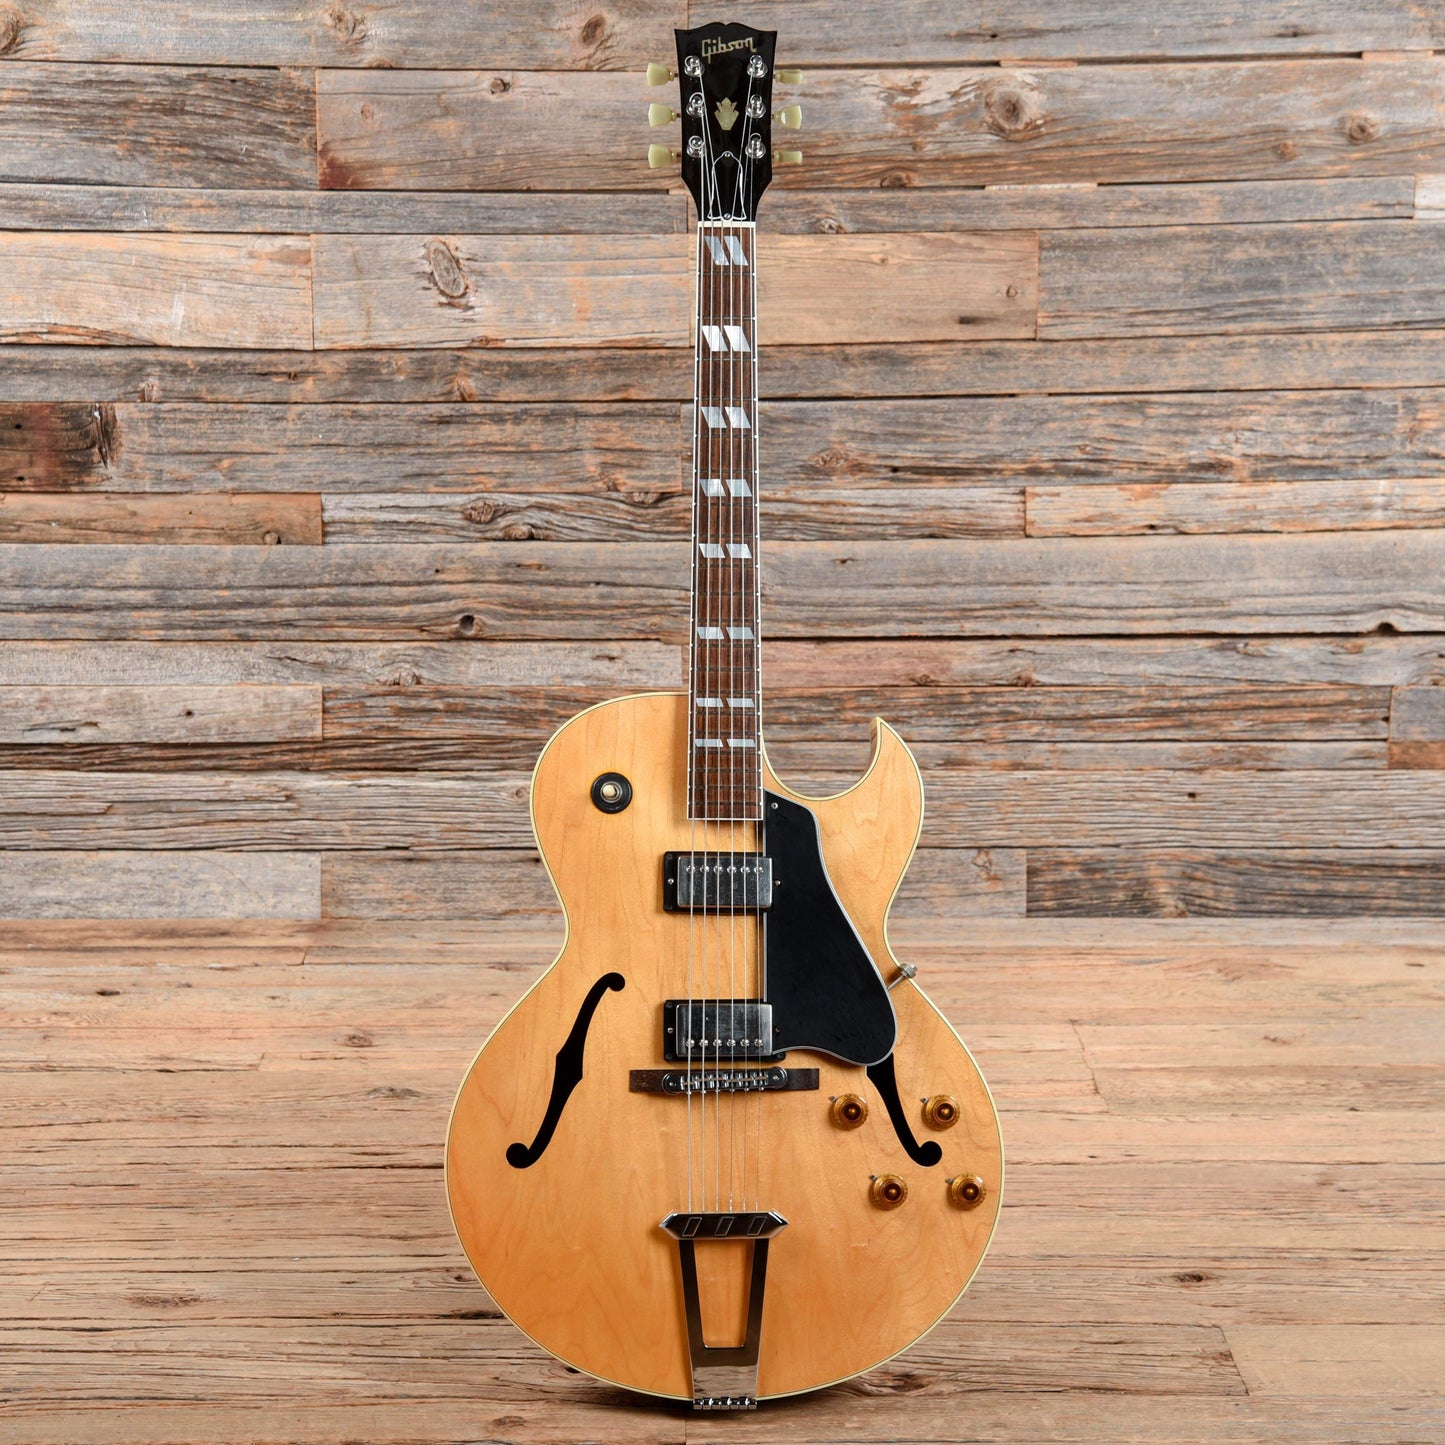 Gibson ES-175 Natural 1988 Electric Guitars / Hollow Body